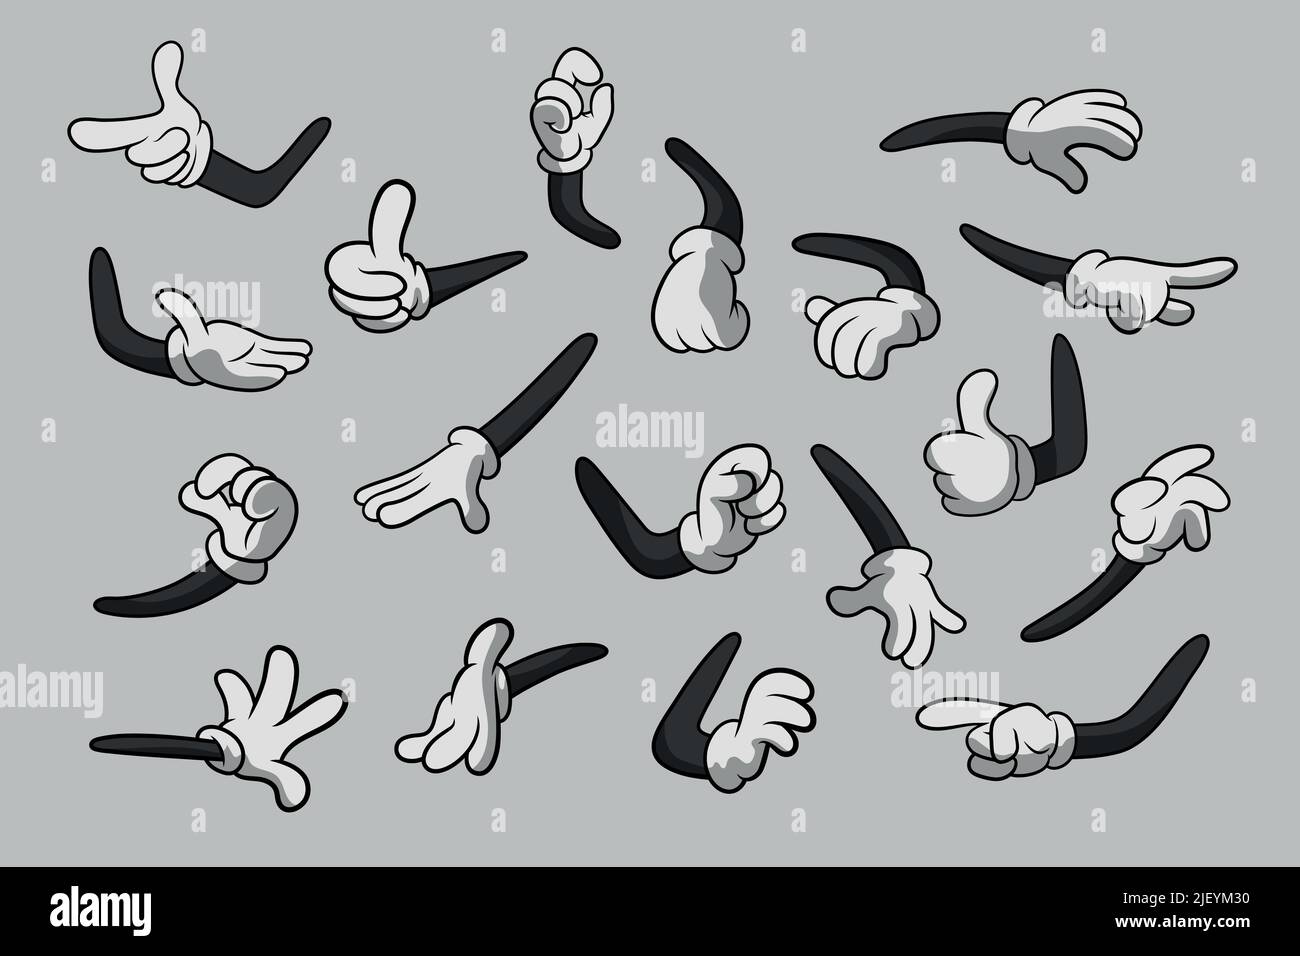 Retro Cartoon Gloved Hands Gestures. Cartoon Hands with Gloves Icon Set Isolated. Vector Clipart - Parts of Body, Arms in White Gloves. Hand Gesture Stock Vector